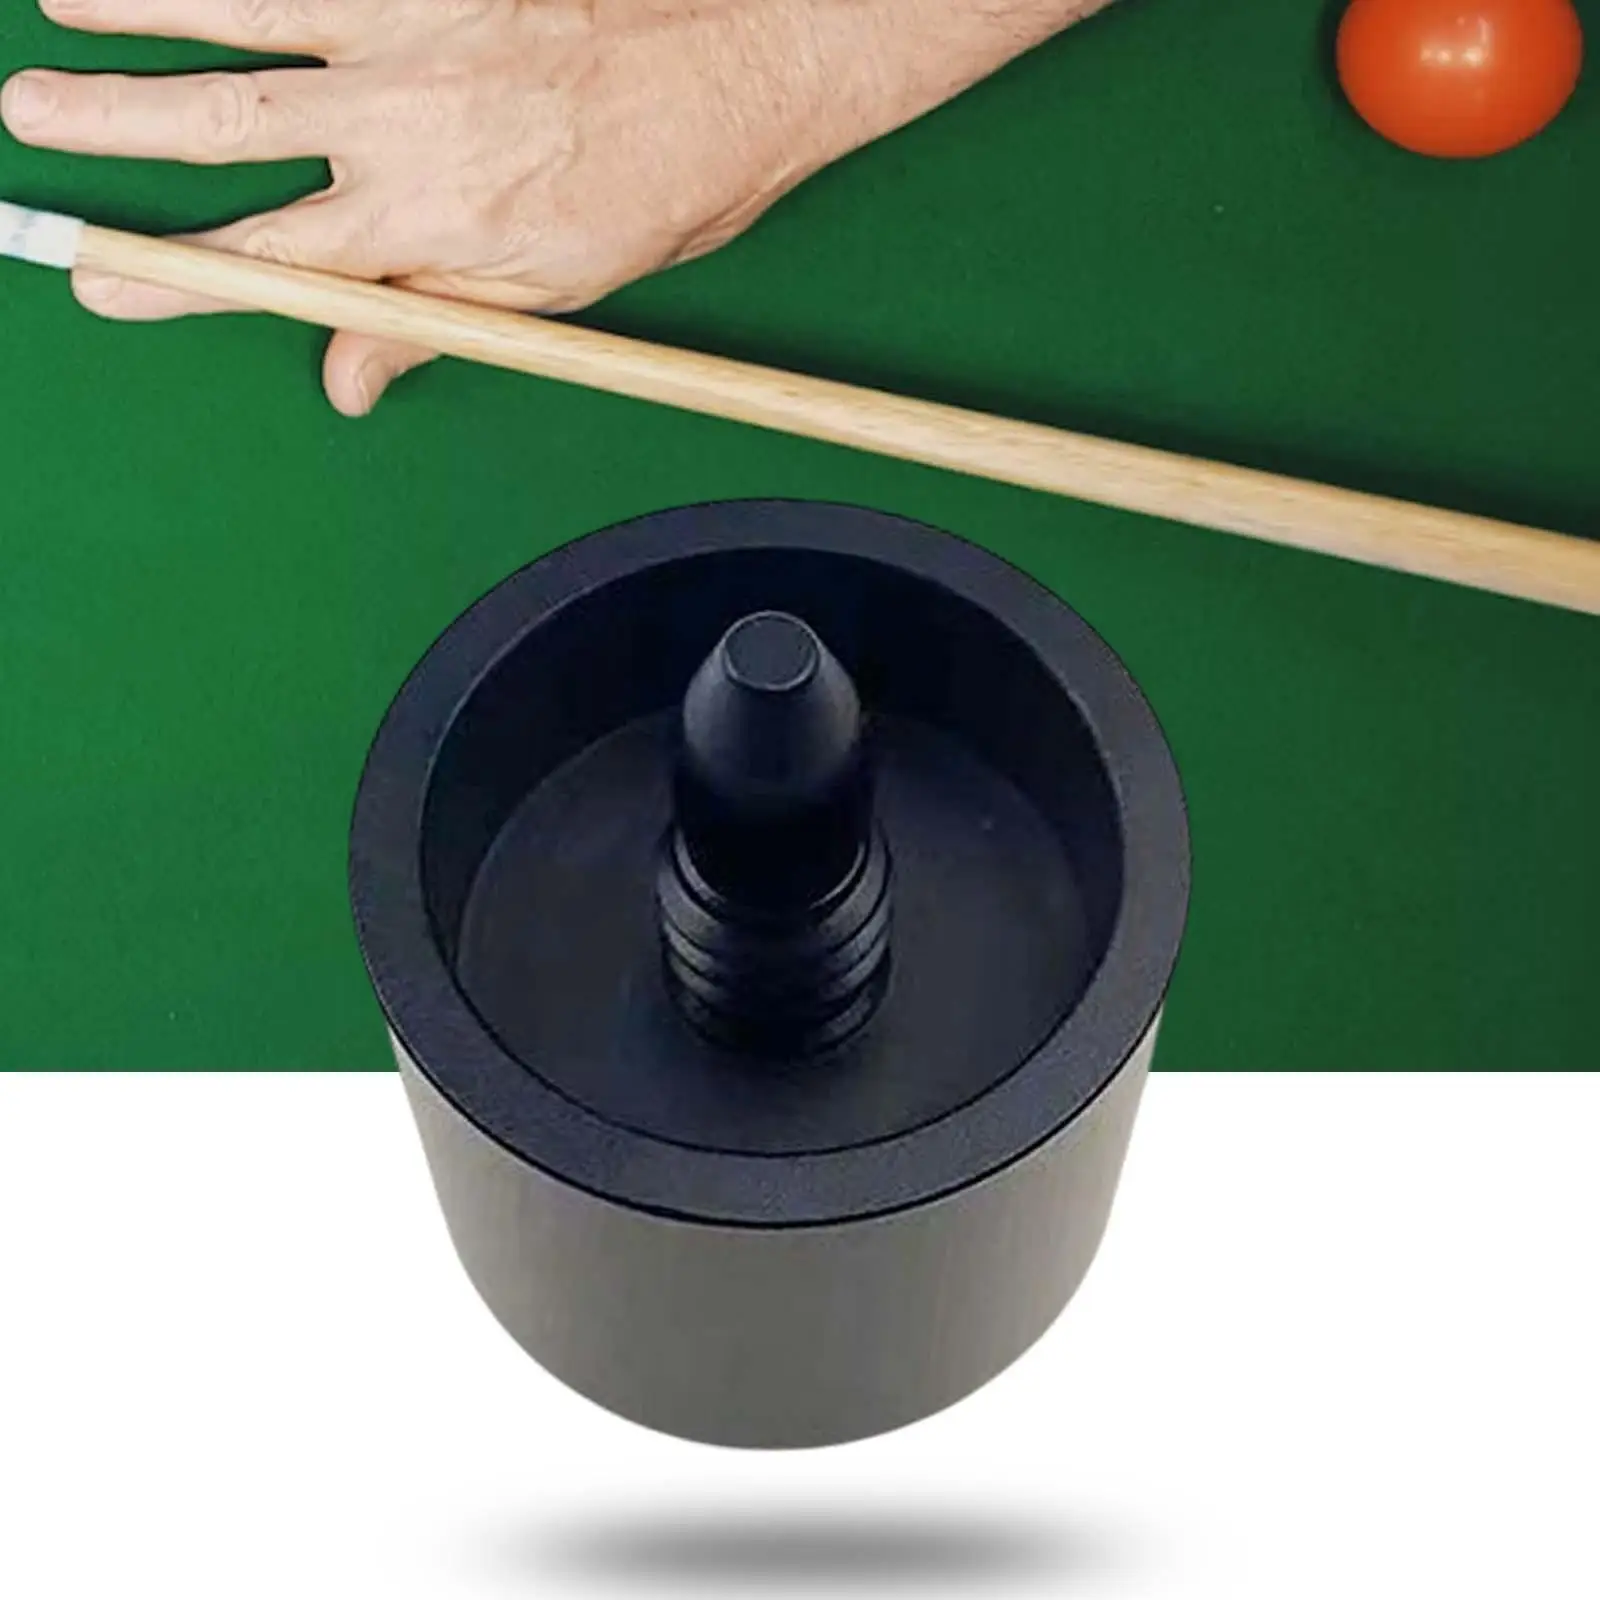 Billiard Pool Cue Extension Billiards Holder Extended Extended for Snooker Cue